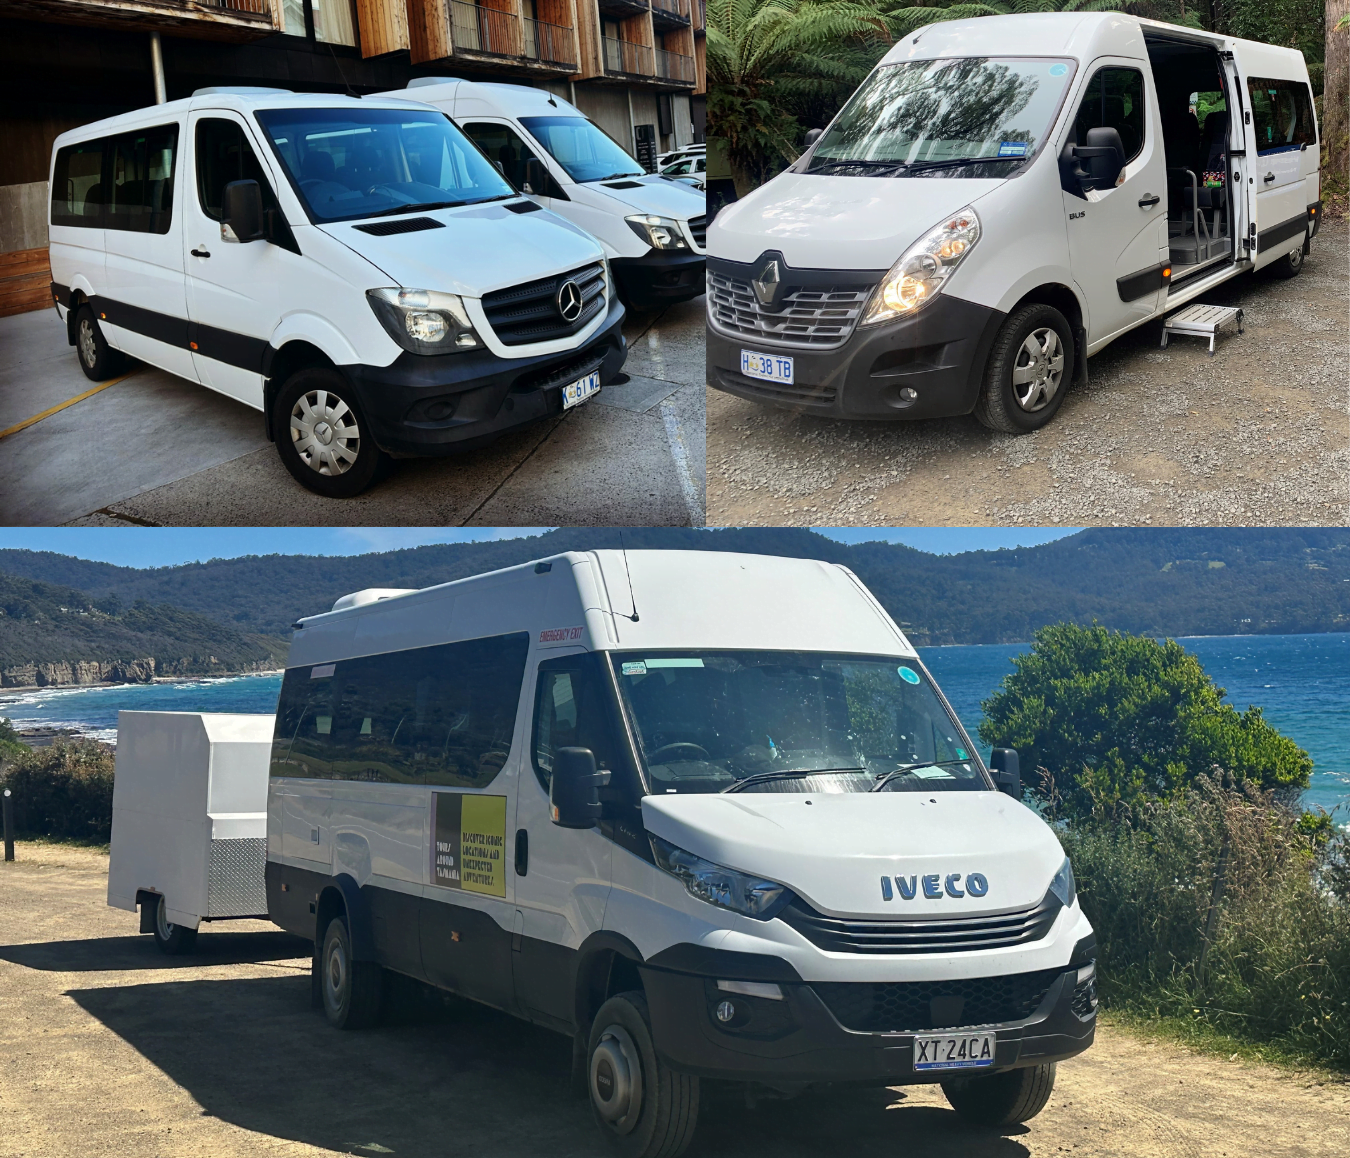 Our luxury vehicle fleet includes a Renault Master, Mercedes Sprinter and Iveco Daily